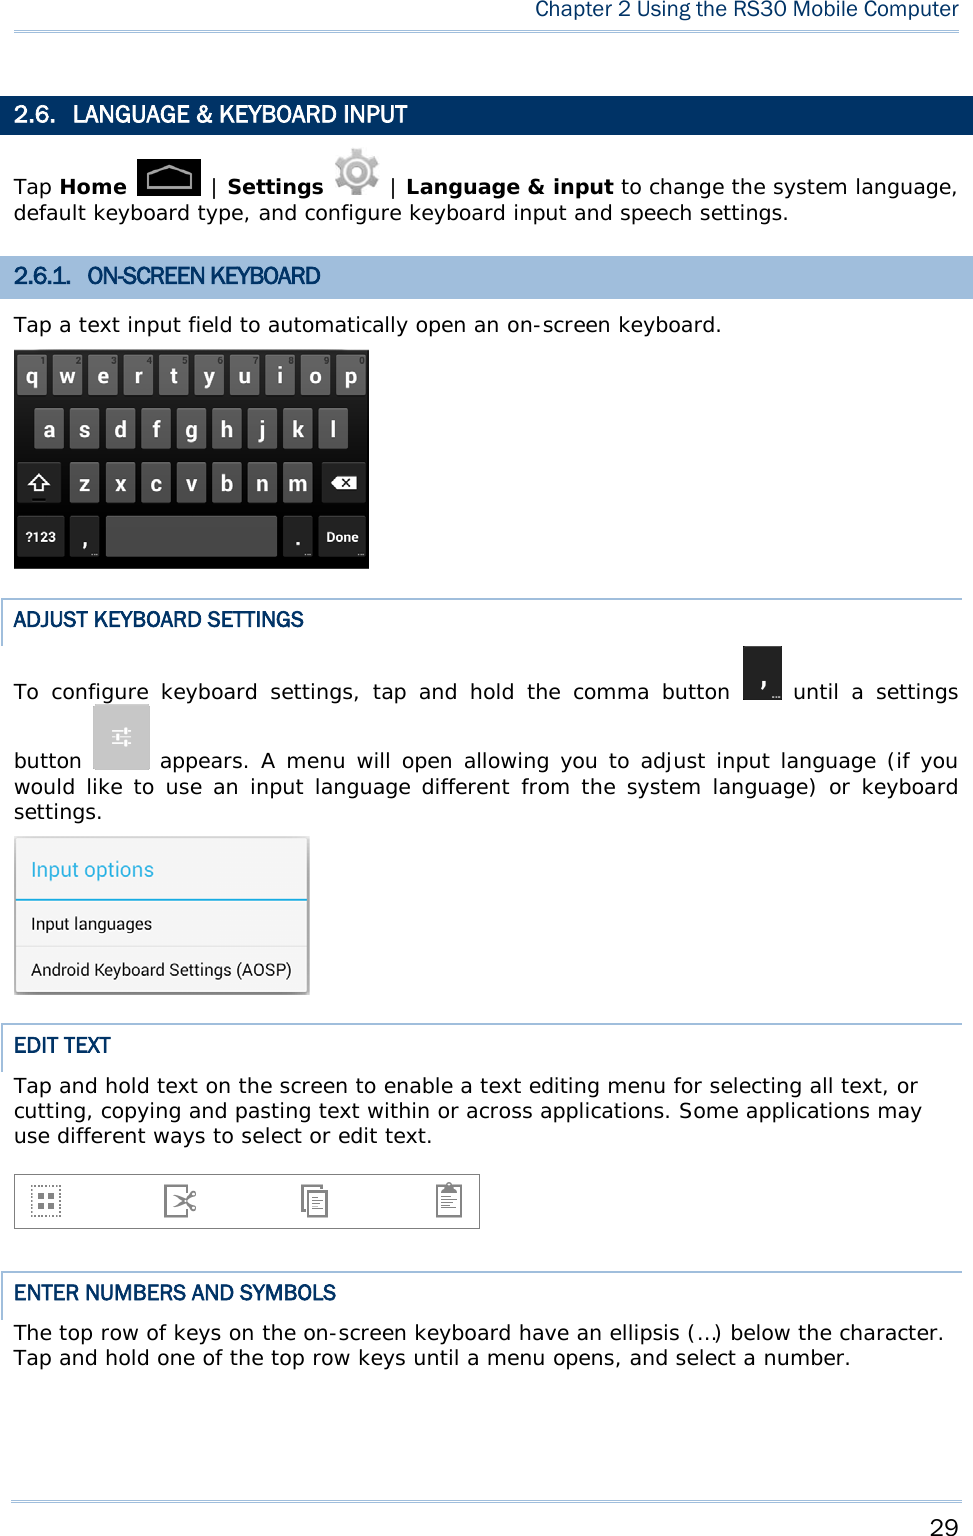     29  Chapter 2 Using the RS30 Mobile Computer  2.6. LANGUAGE &amp; KEYBOARD INPUT Tap Home   | Settings   | Language &amp; input to change the system language, default keyboard type, and configure keyboard input and speech settings.  2.6.1. ON-SCREEN KEYBOARD Tap a text input field to automatically open an on-screen keyboard.  ADJUST KEYBOARD SETTINGS To configure keyboard settings, tap and hold the comma button   until a settings button   appears. A menu will open allowing you to adjust input language (if you would like to use an input language different from the system language) or keyboard settings.   EDIT TEXT Tap and hold text on the screen to enable a text editing menu for selecting all text, or cutting, copying and pasting text within or across applications. Some applications may use different ways to select or edit text.     ENTER NUMBERS AND SYMBOLS The top row of keys on the on-screen keyboard have an ellipsis (…) below the character. Tap and hold one of the top row keys until a menu opens, and select a number.  